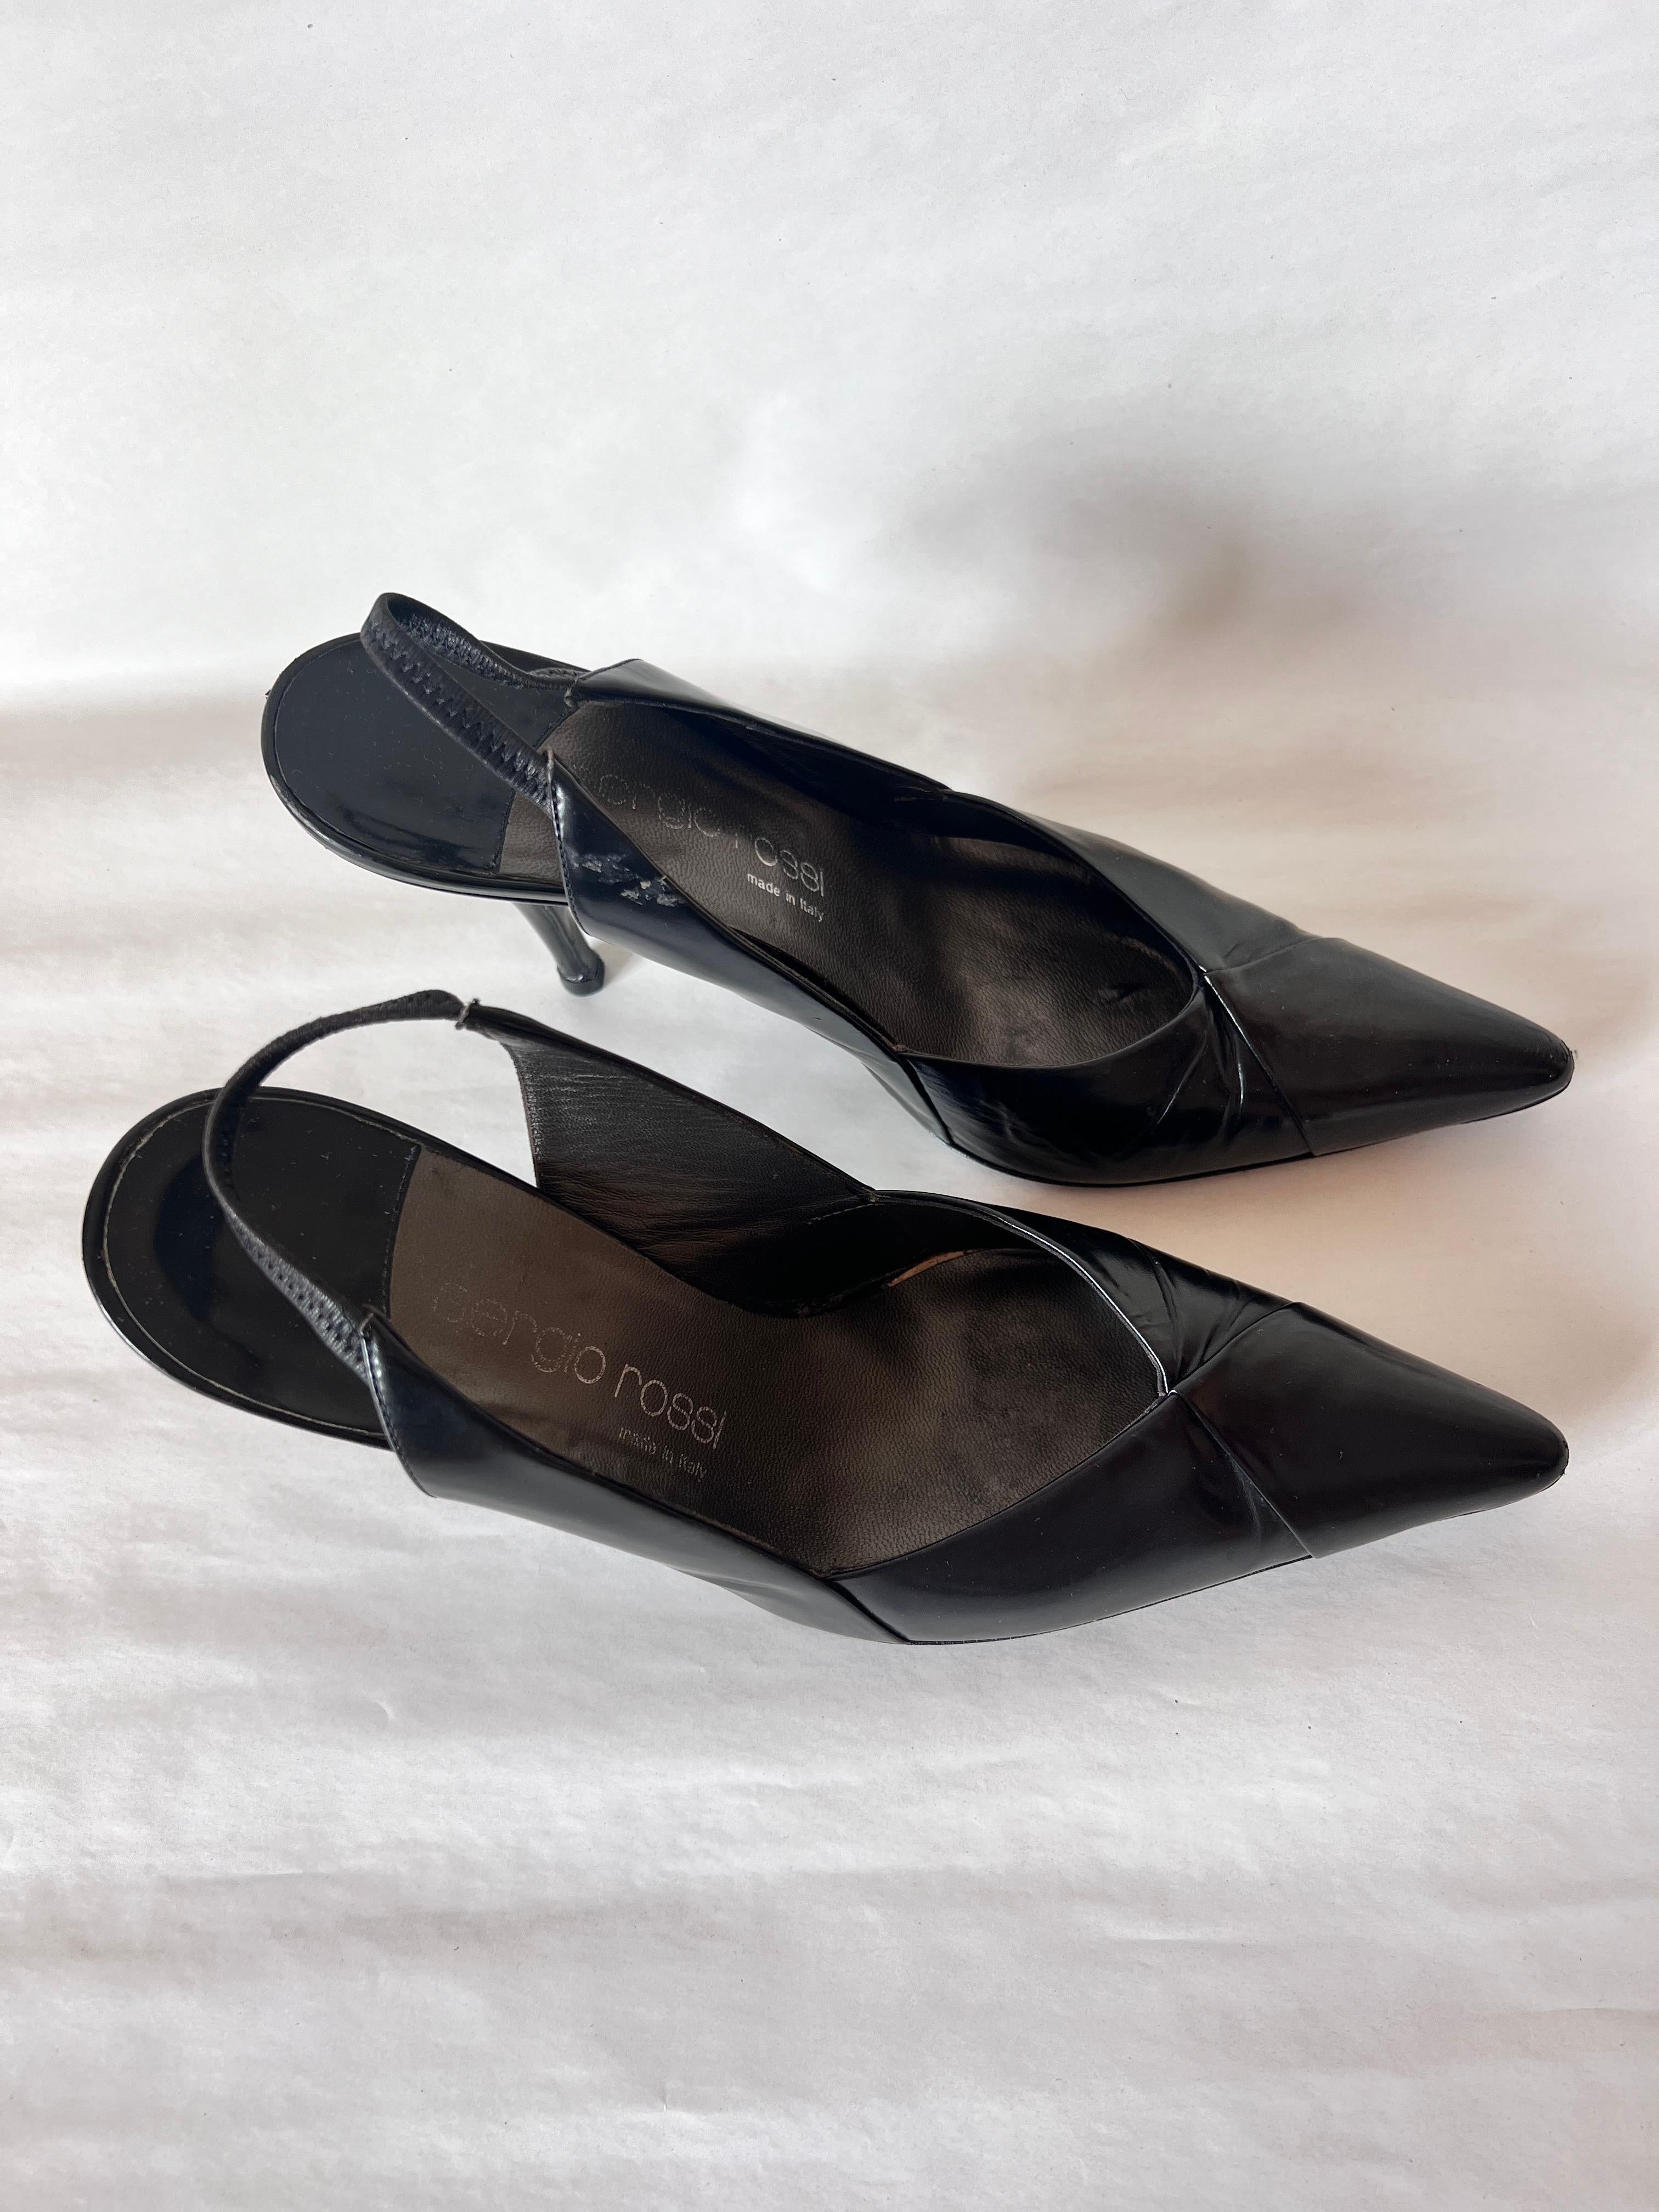 Sergio Rossi Black Satin Leather Cocktail Open Back Shoes For Sale 1